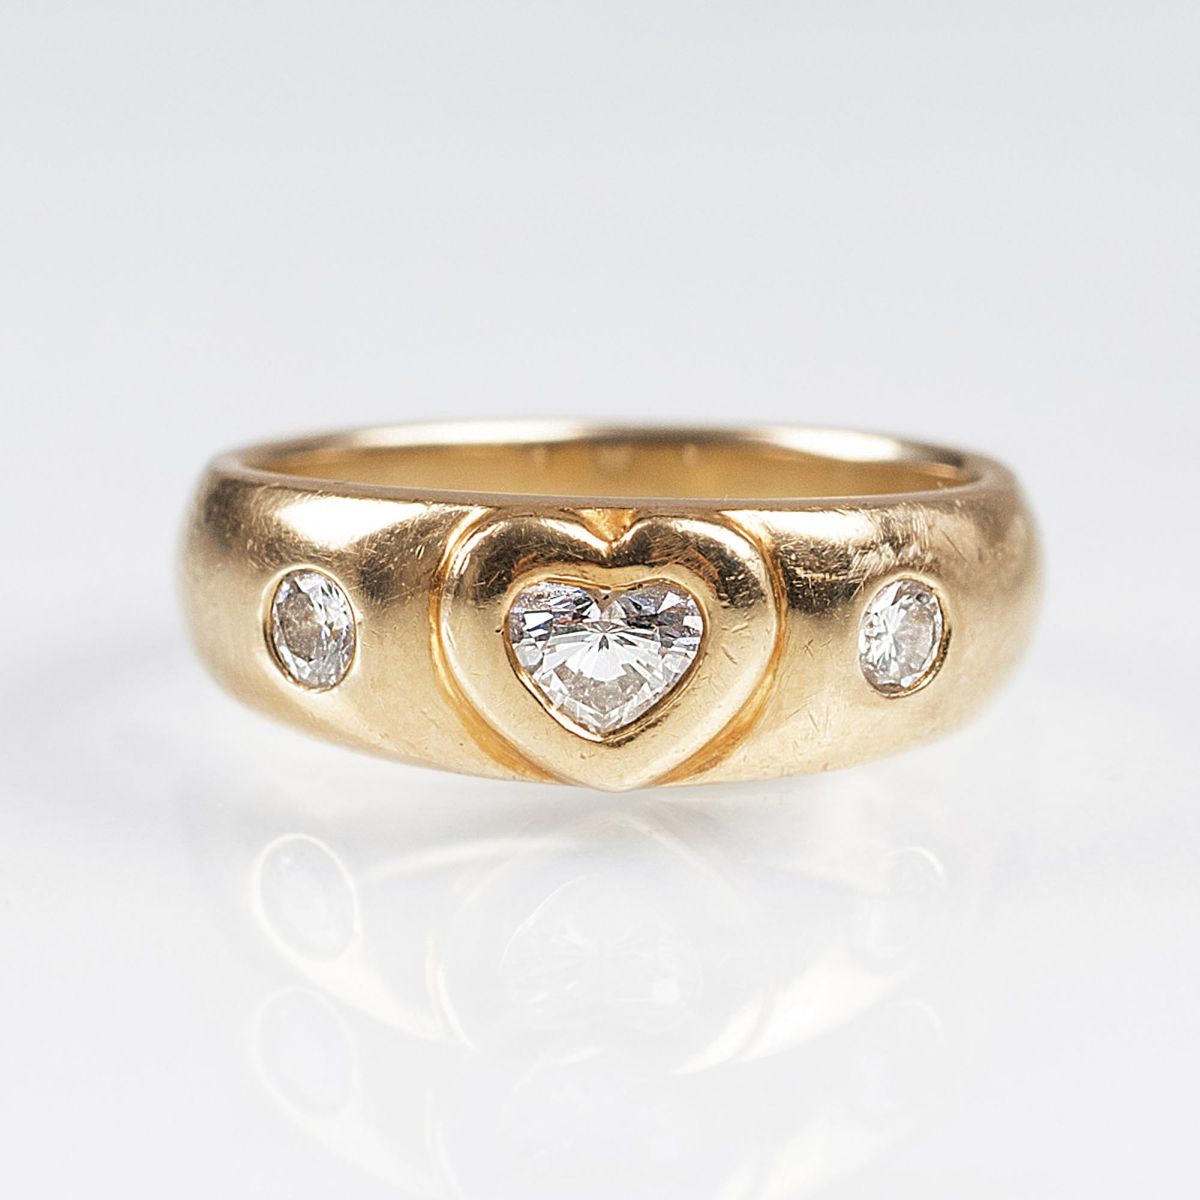 A Gold Ring with Heart Cut Diamond